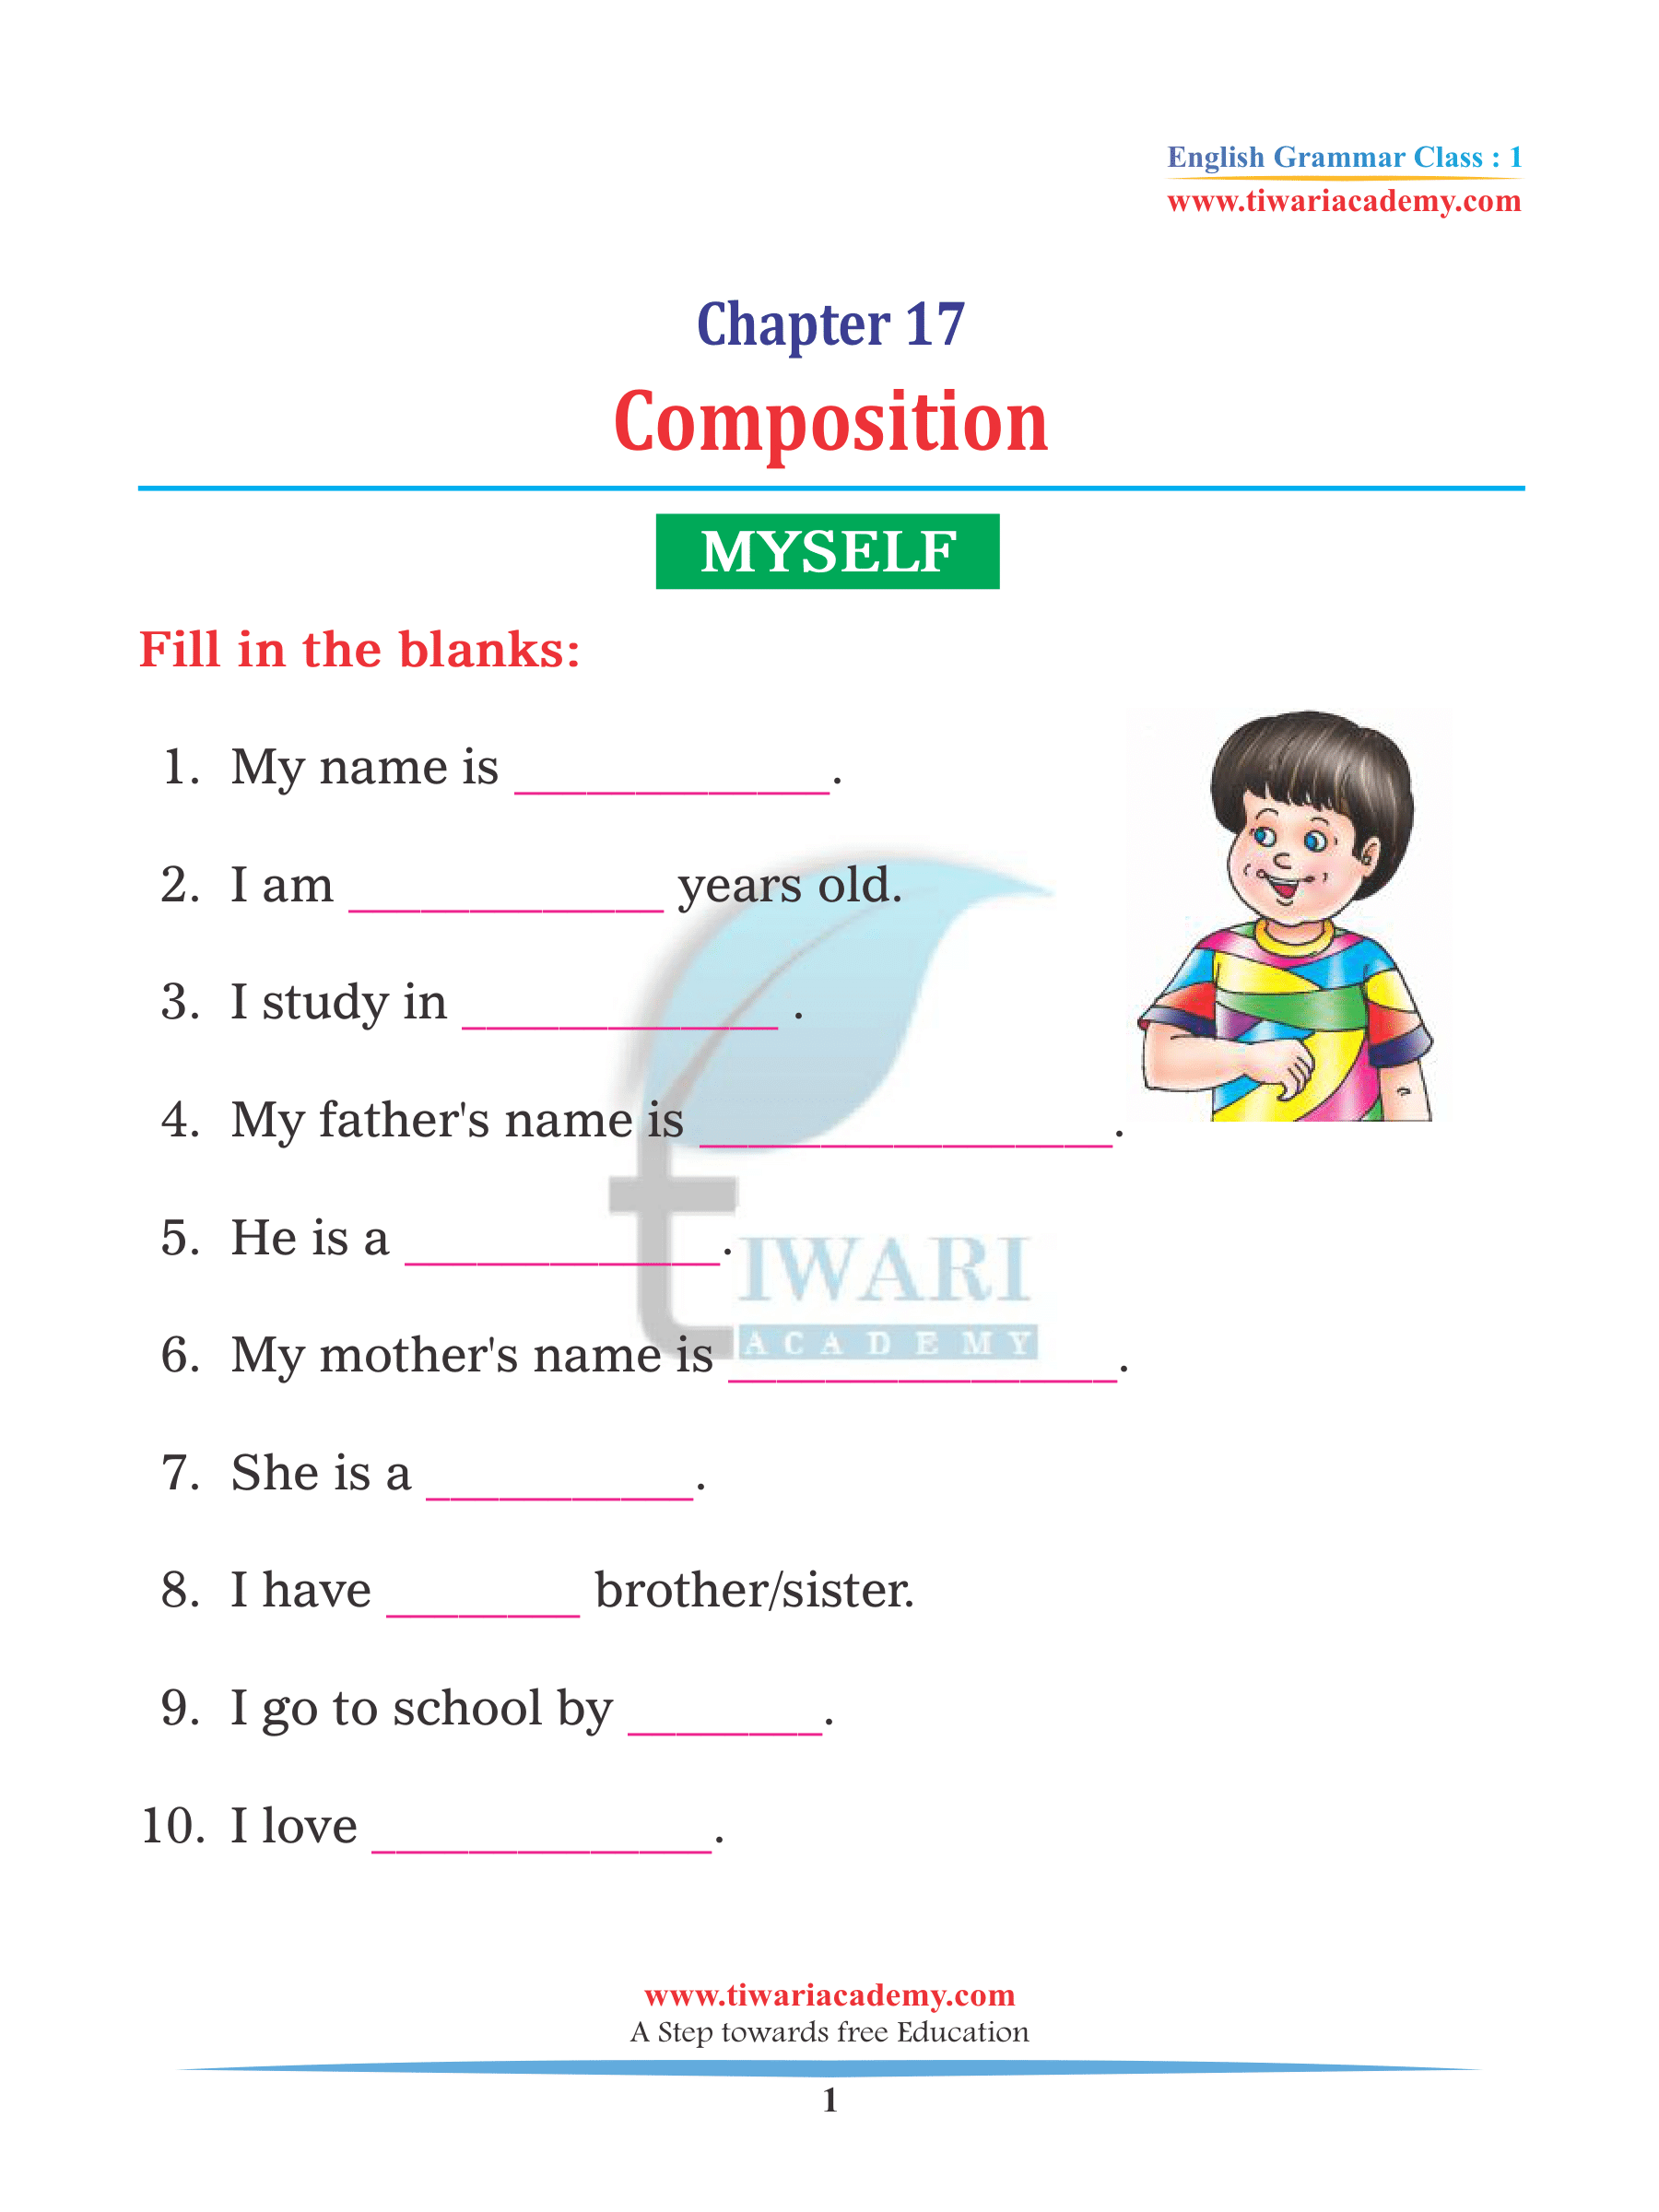 Composition for Class 1 English Grammar